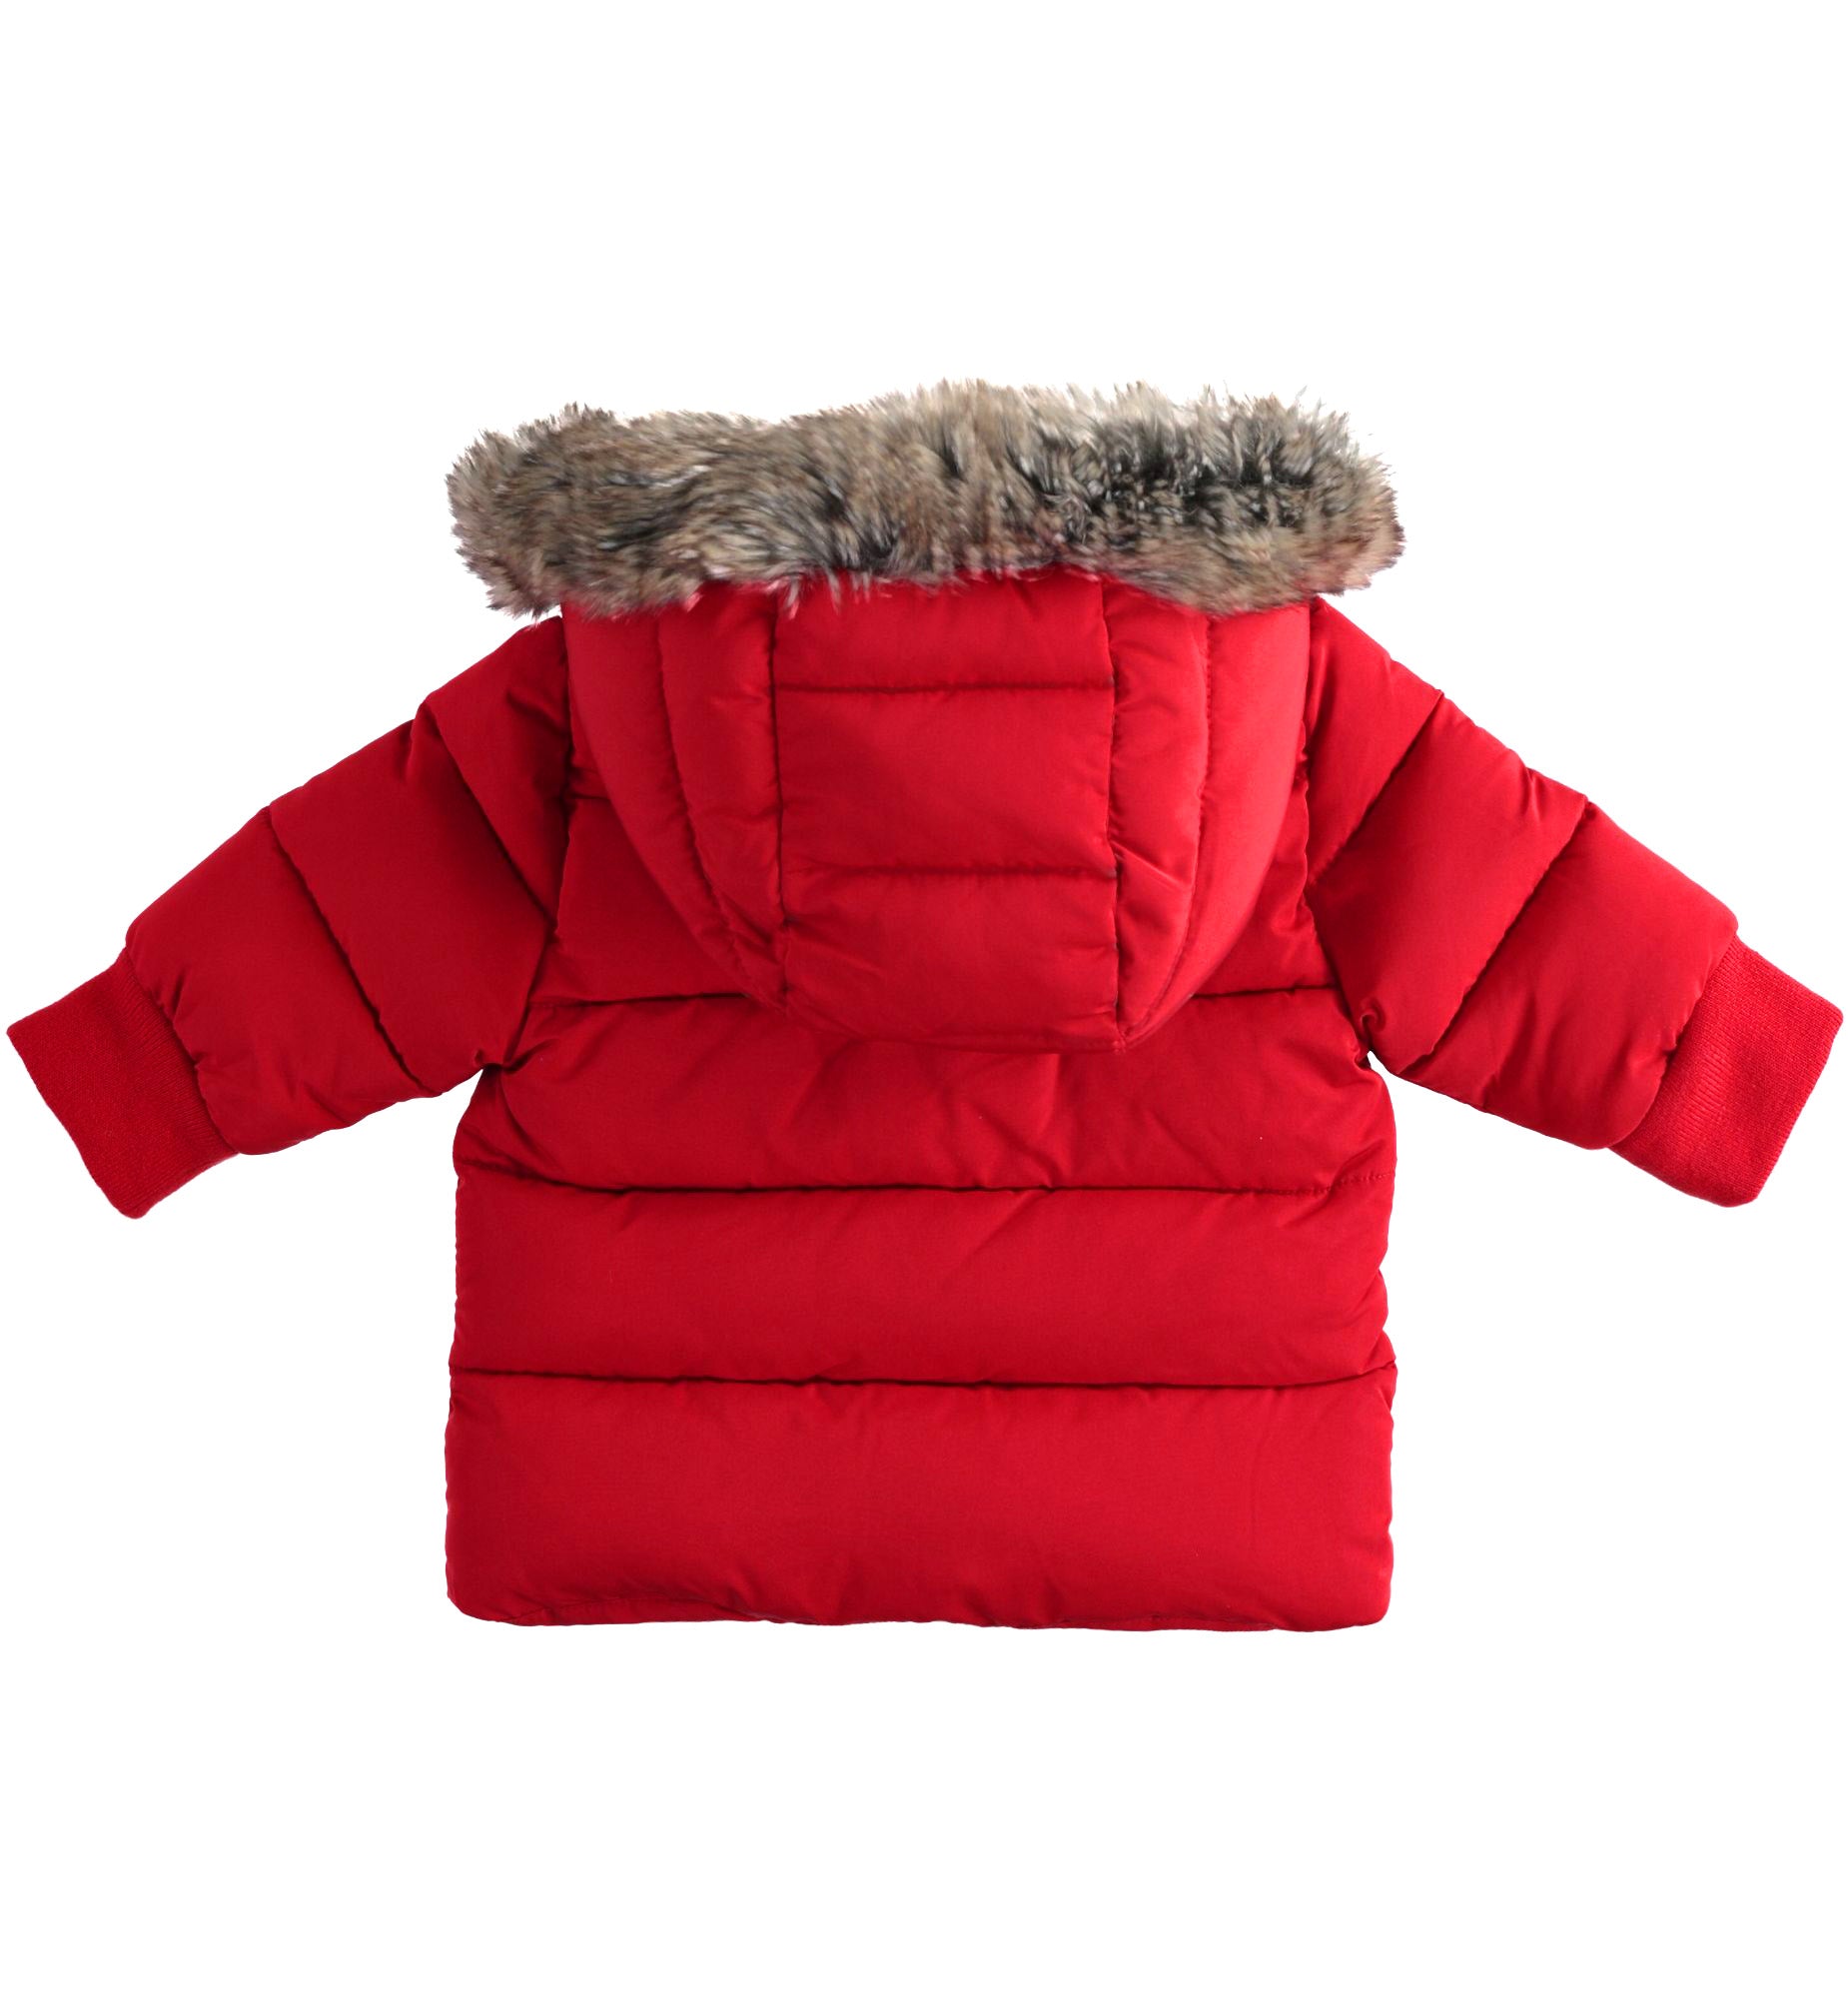 Red Winter Down Jacket with Hood - LAST ONE IN 18 MONTHS